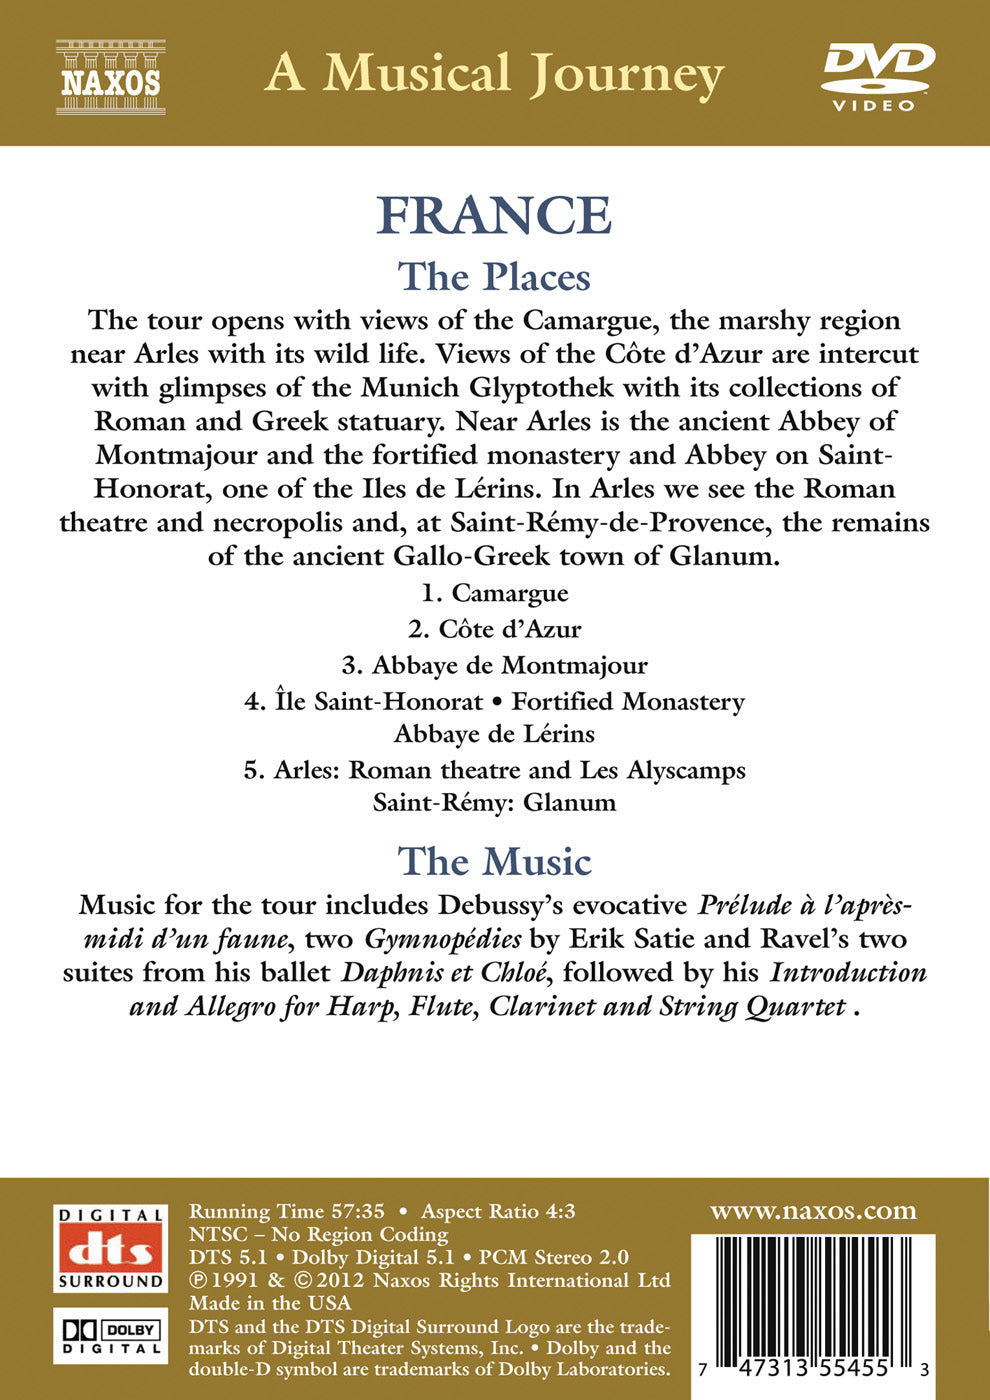 France: Musical Tour of the South of France